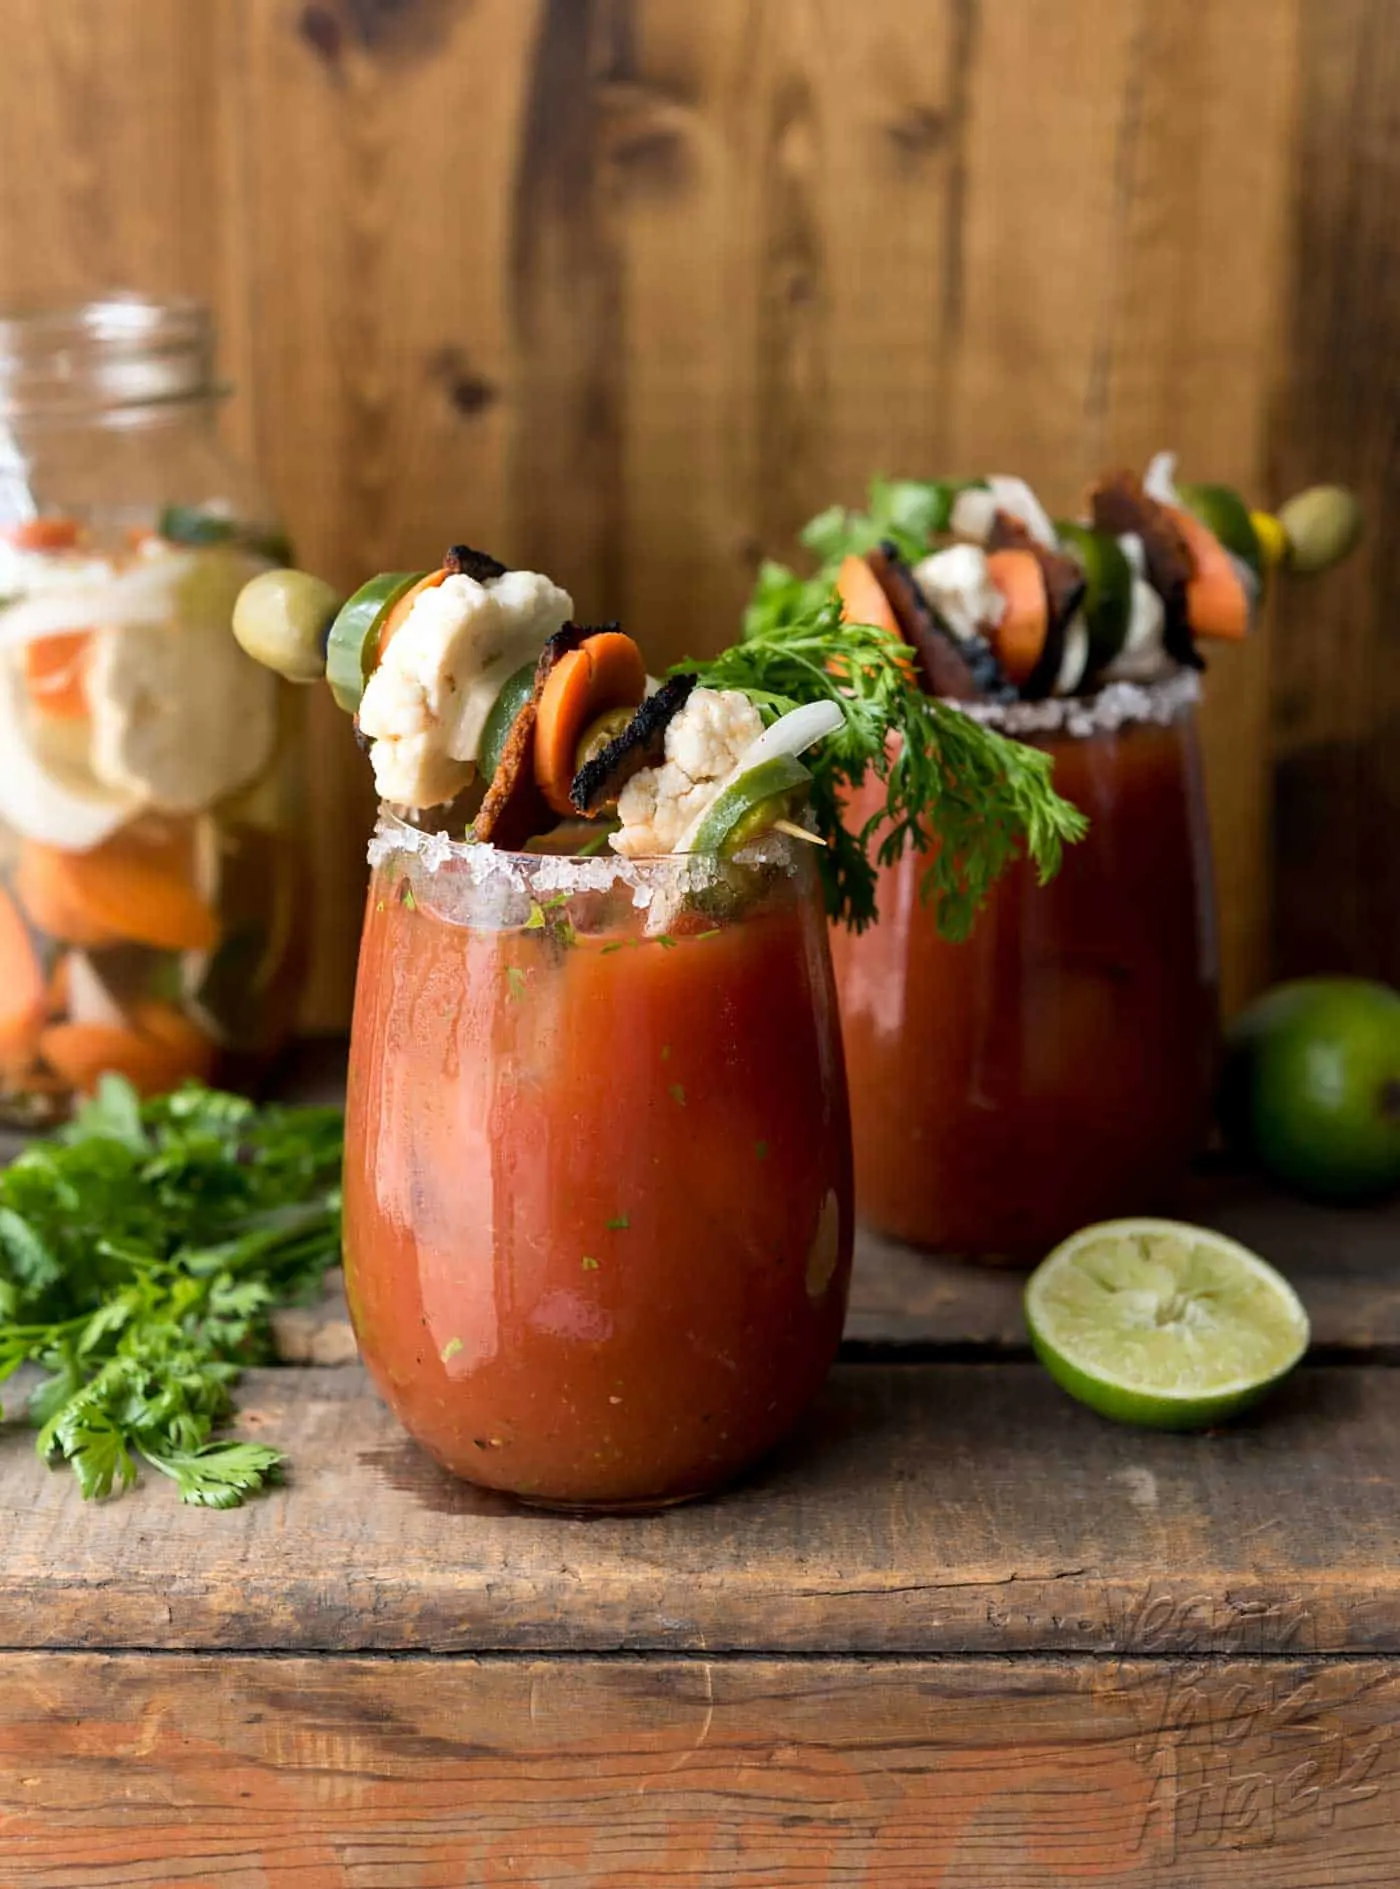 Loaded Chipotle Bloody Mary! Full of flavor from fresh cilantro, lime, homemade escabeche and #vegan bacon. #fathersday #craftyourcocktail